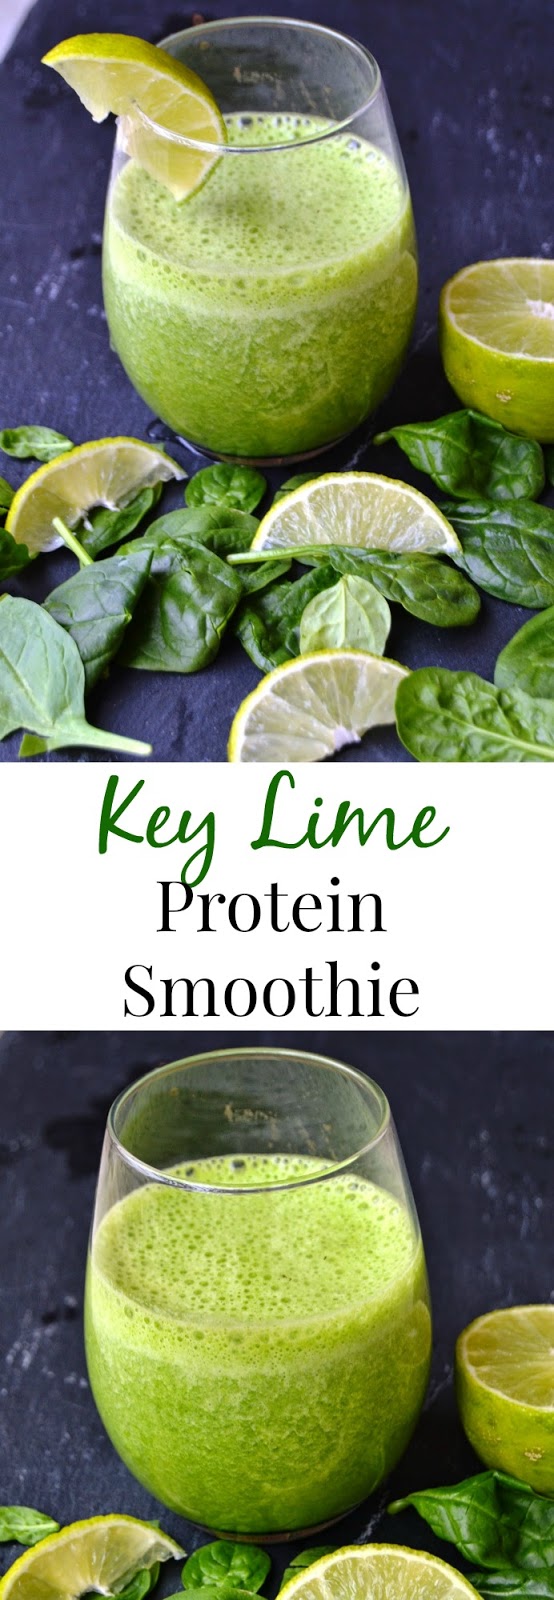 This Key Lime Protein Smoothie is packed full of tart lime flavor and is rich in protein making the perfect breakfast, snack or dessert! www.nutritionistreviews.com